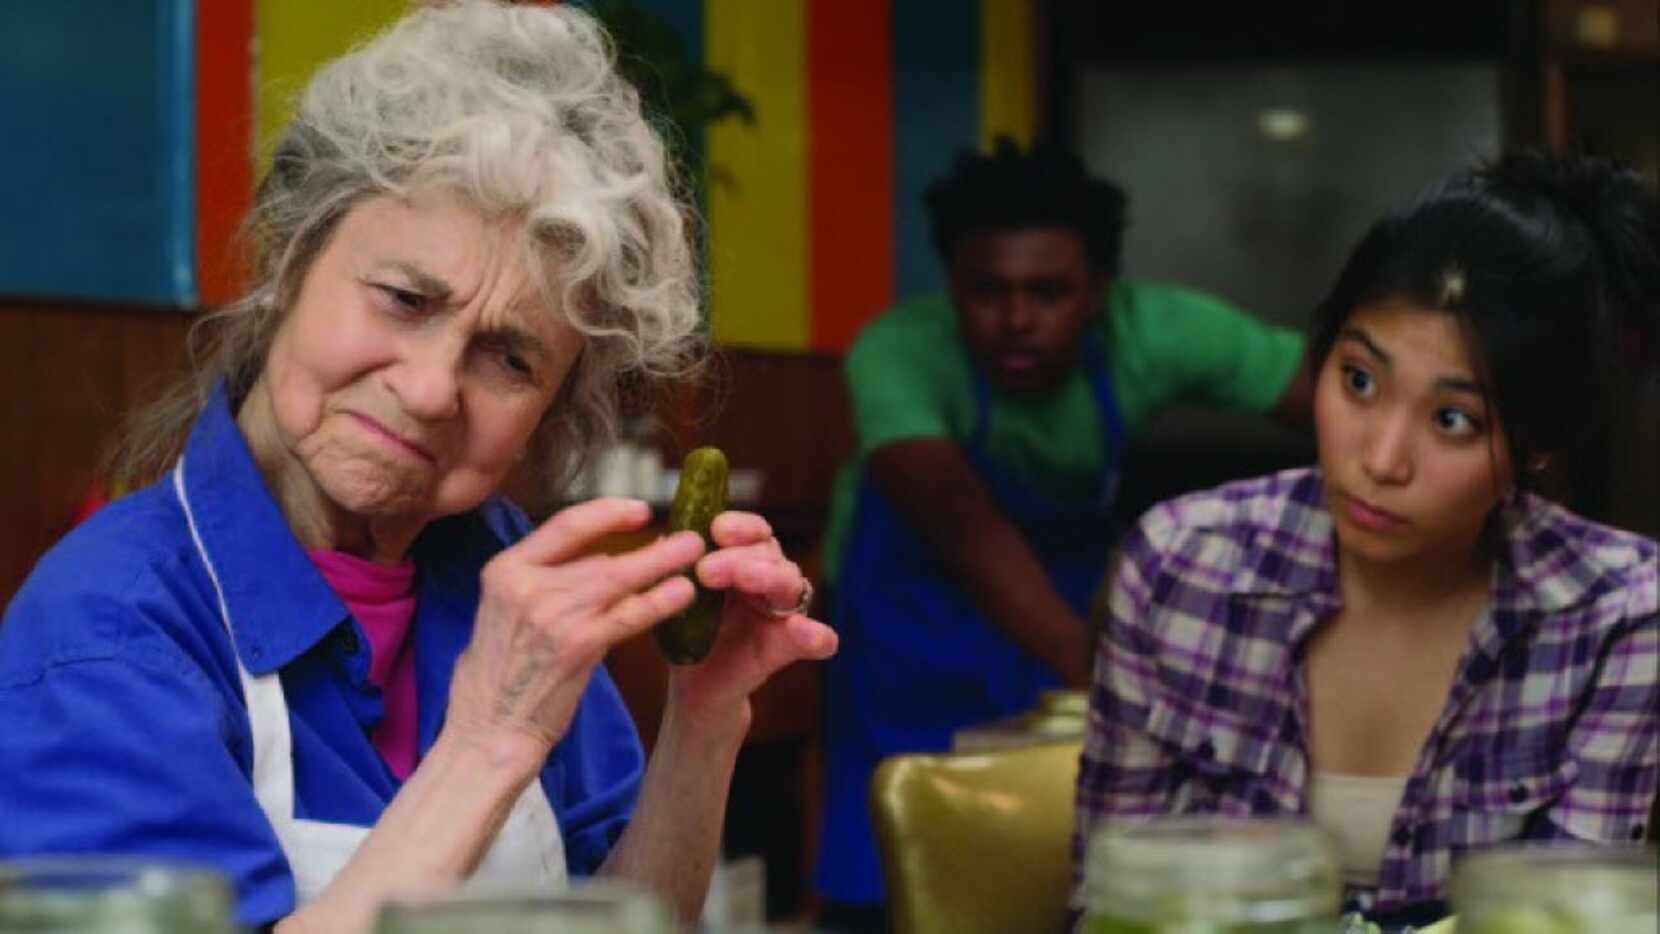 Pickle Recipe is one of the films in the 2017 Jewish Film Festival of Dallas.